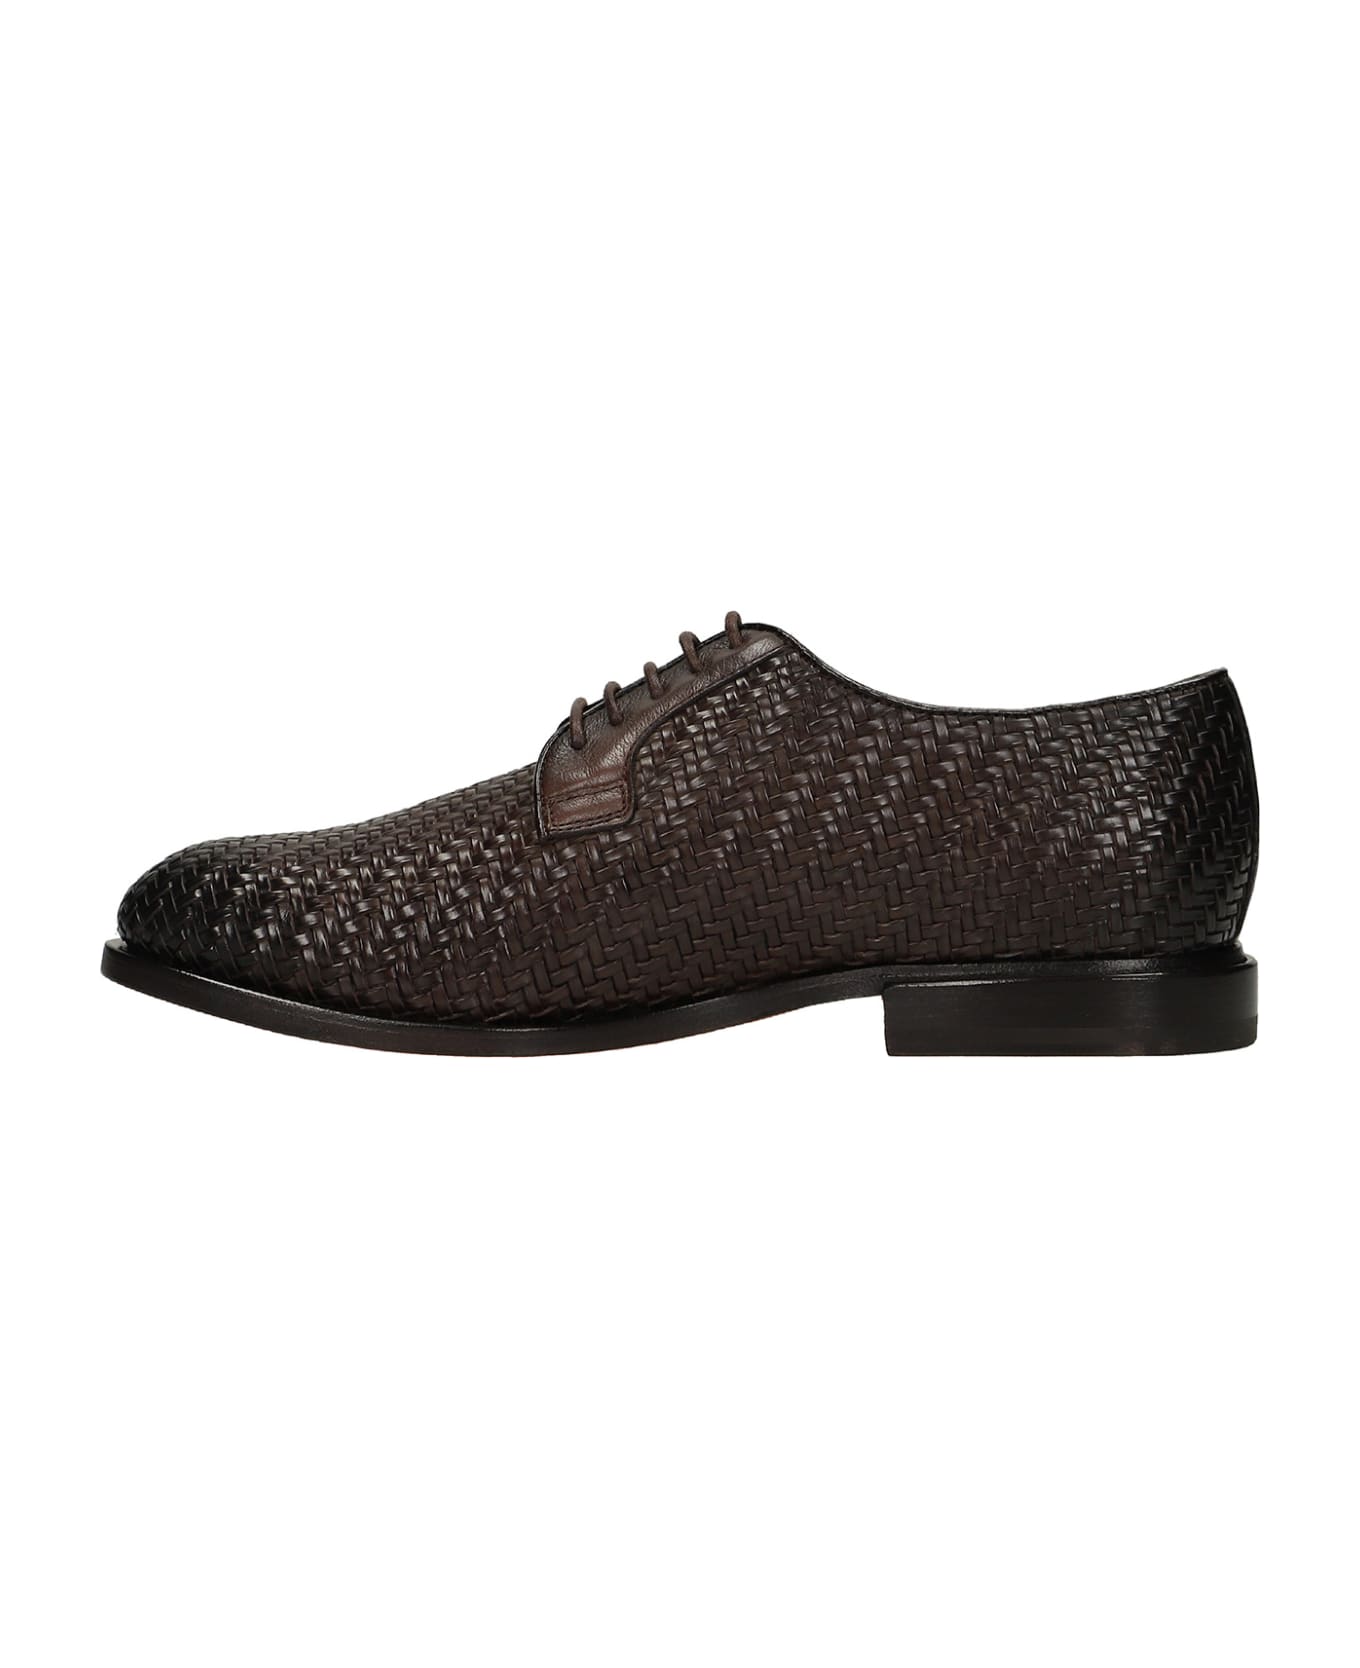 Santoni Lace Up Shoes In Brown Leather - brown